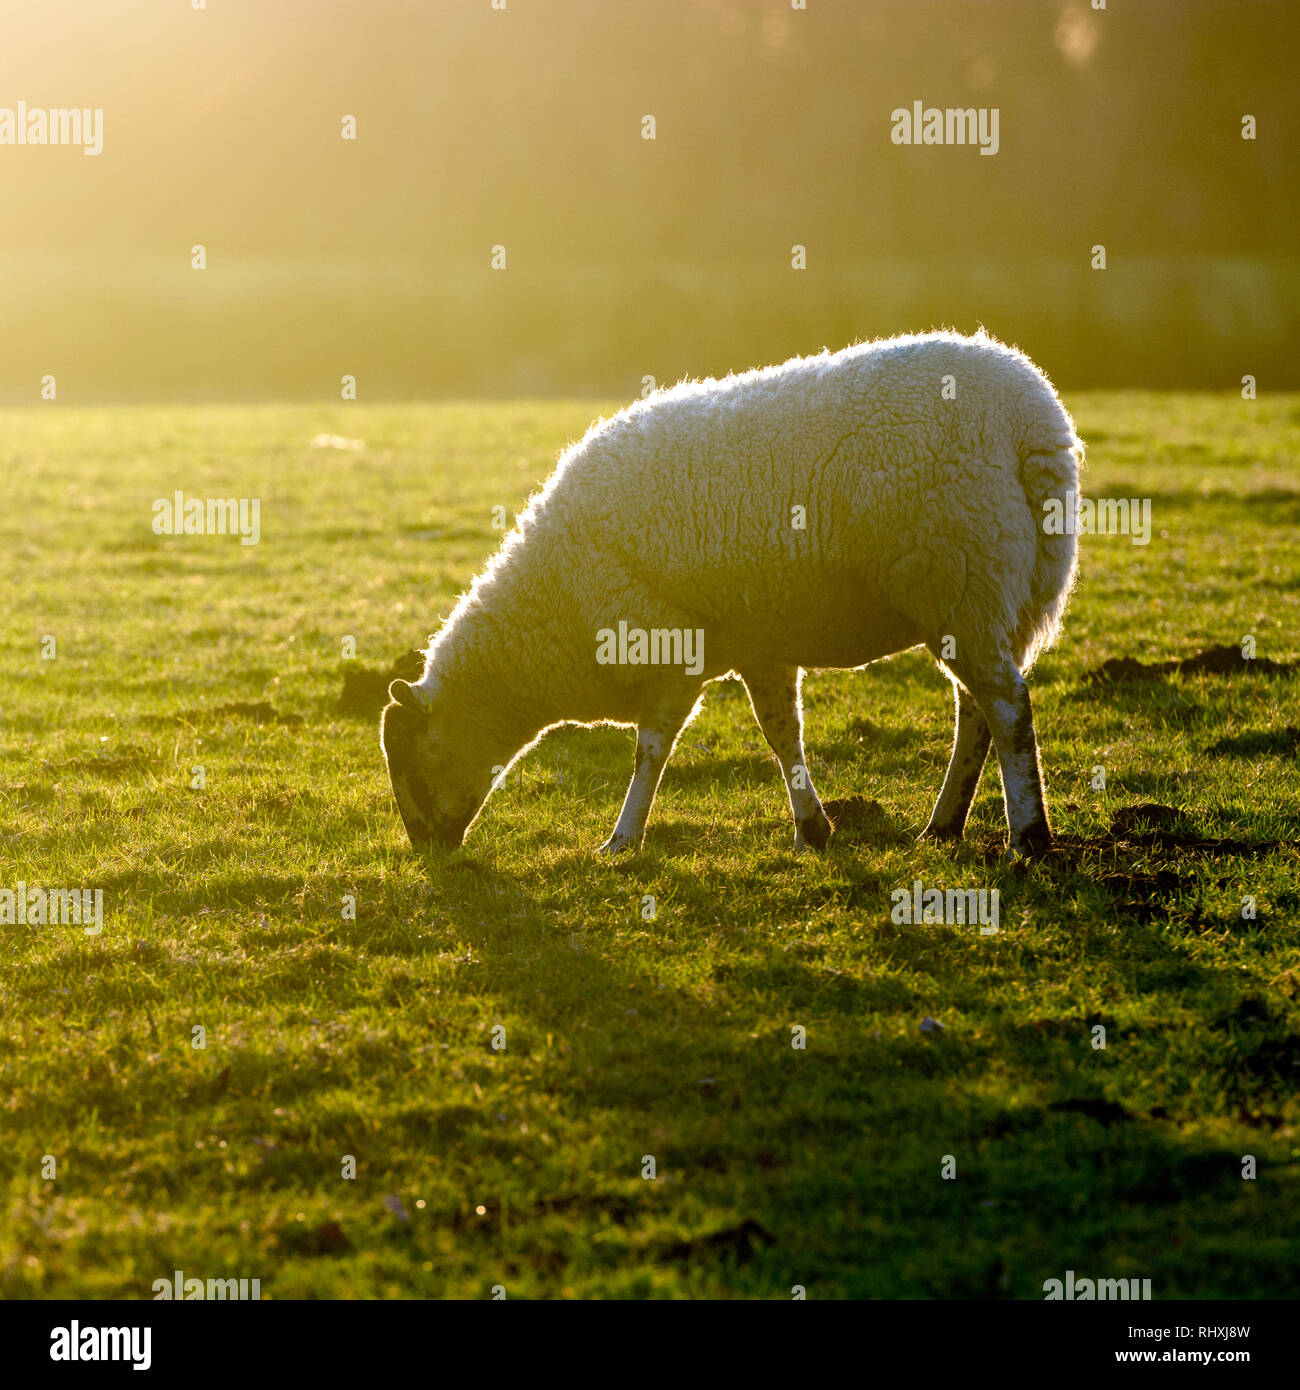 Backlit view of a sheep in winter, Warwickshire, UK Stock Photo